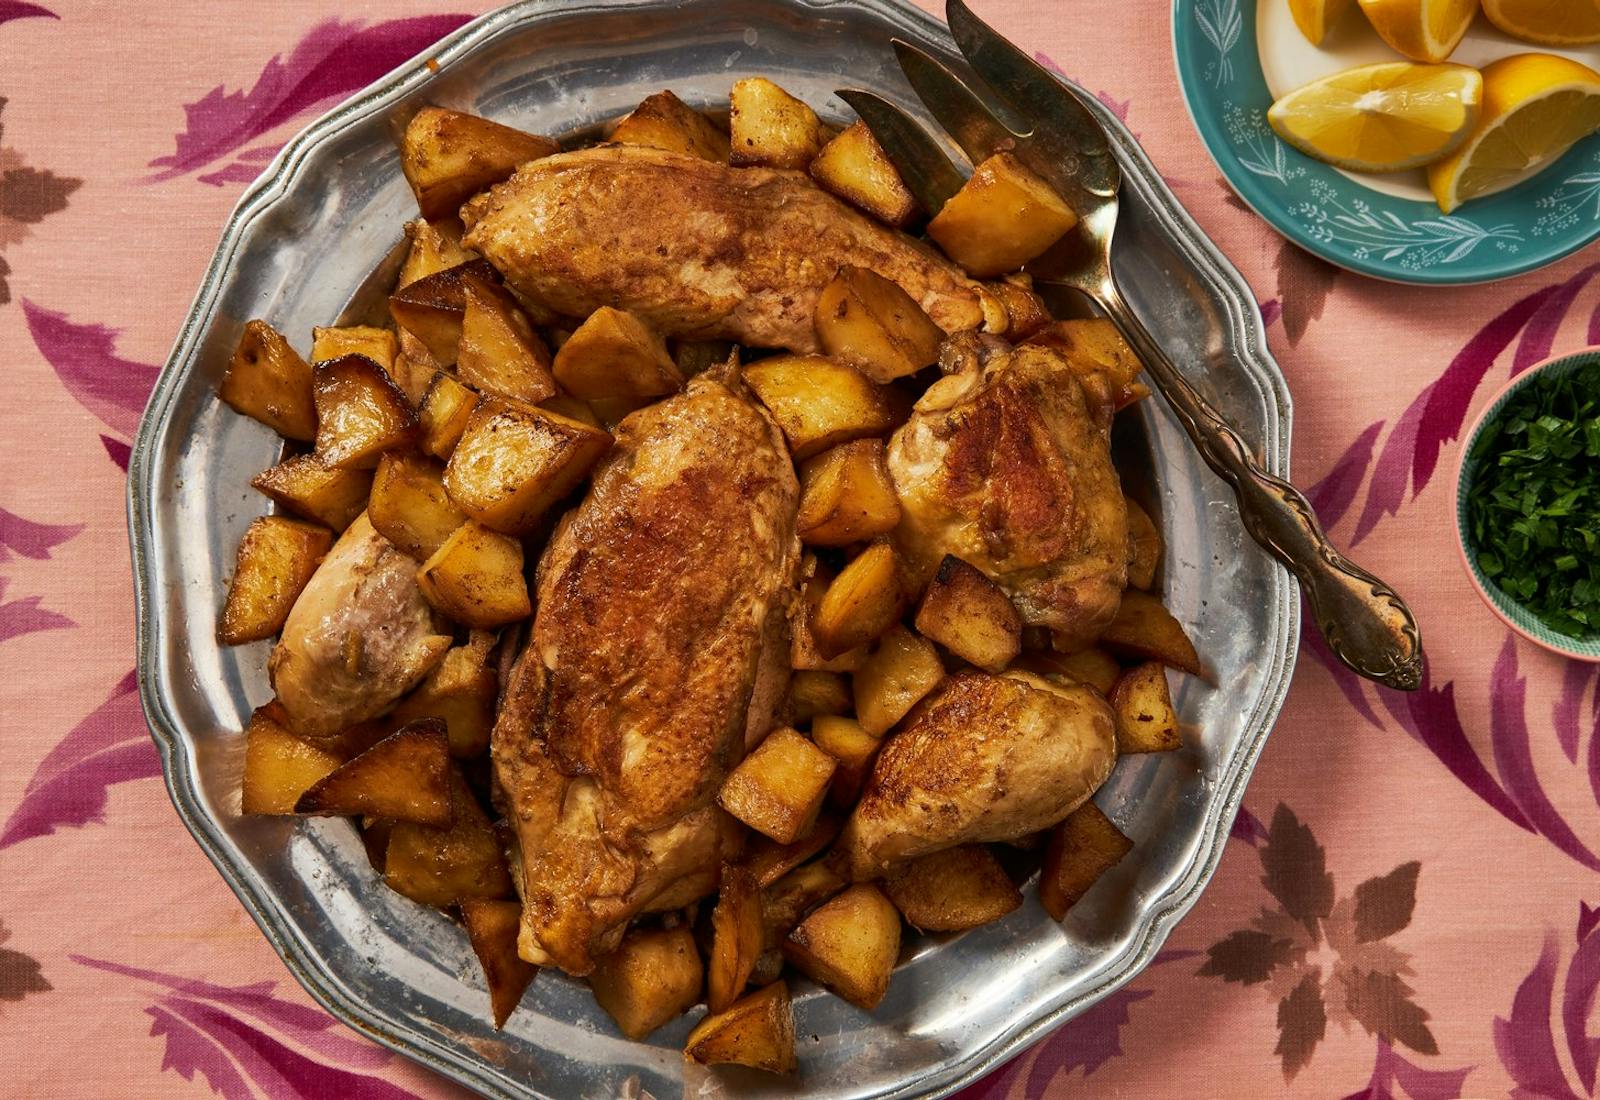 Chicken and potatoes on silver tray, lemons and parsley atop pink floral tablecloth.